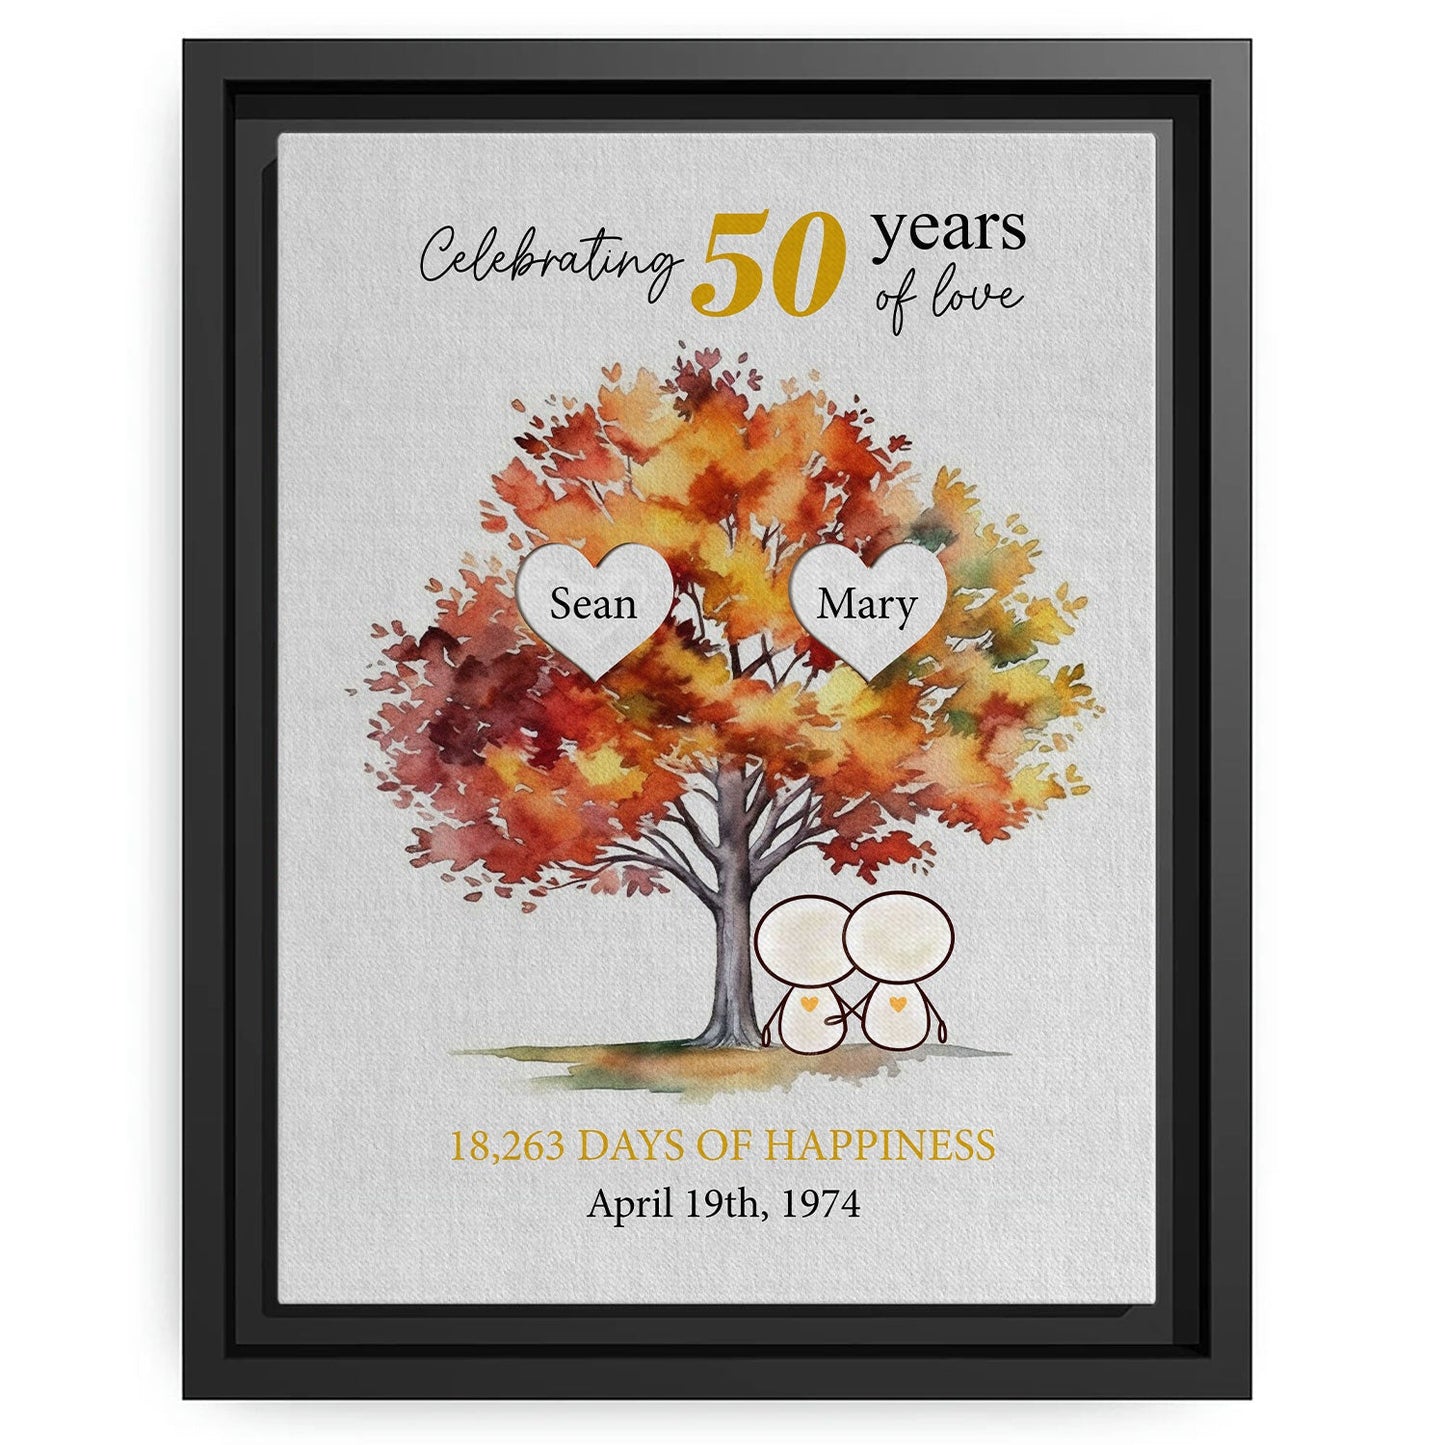 Celebrating 50 Years Of Love - Personalized 50 Year Anniversary gift For Parents, Friends, Husband or Wife - Custom Canvas Print - MyMindfulGifts